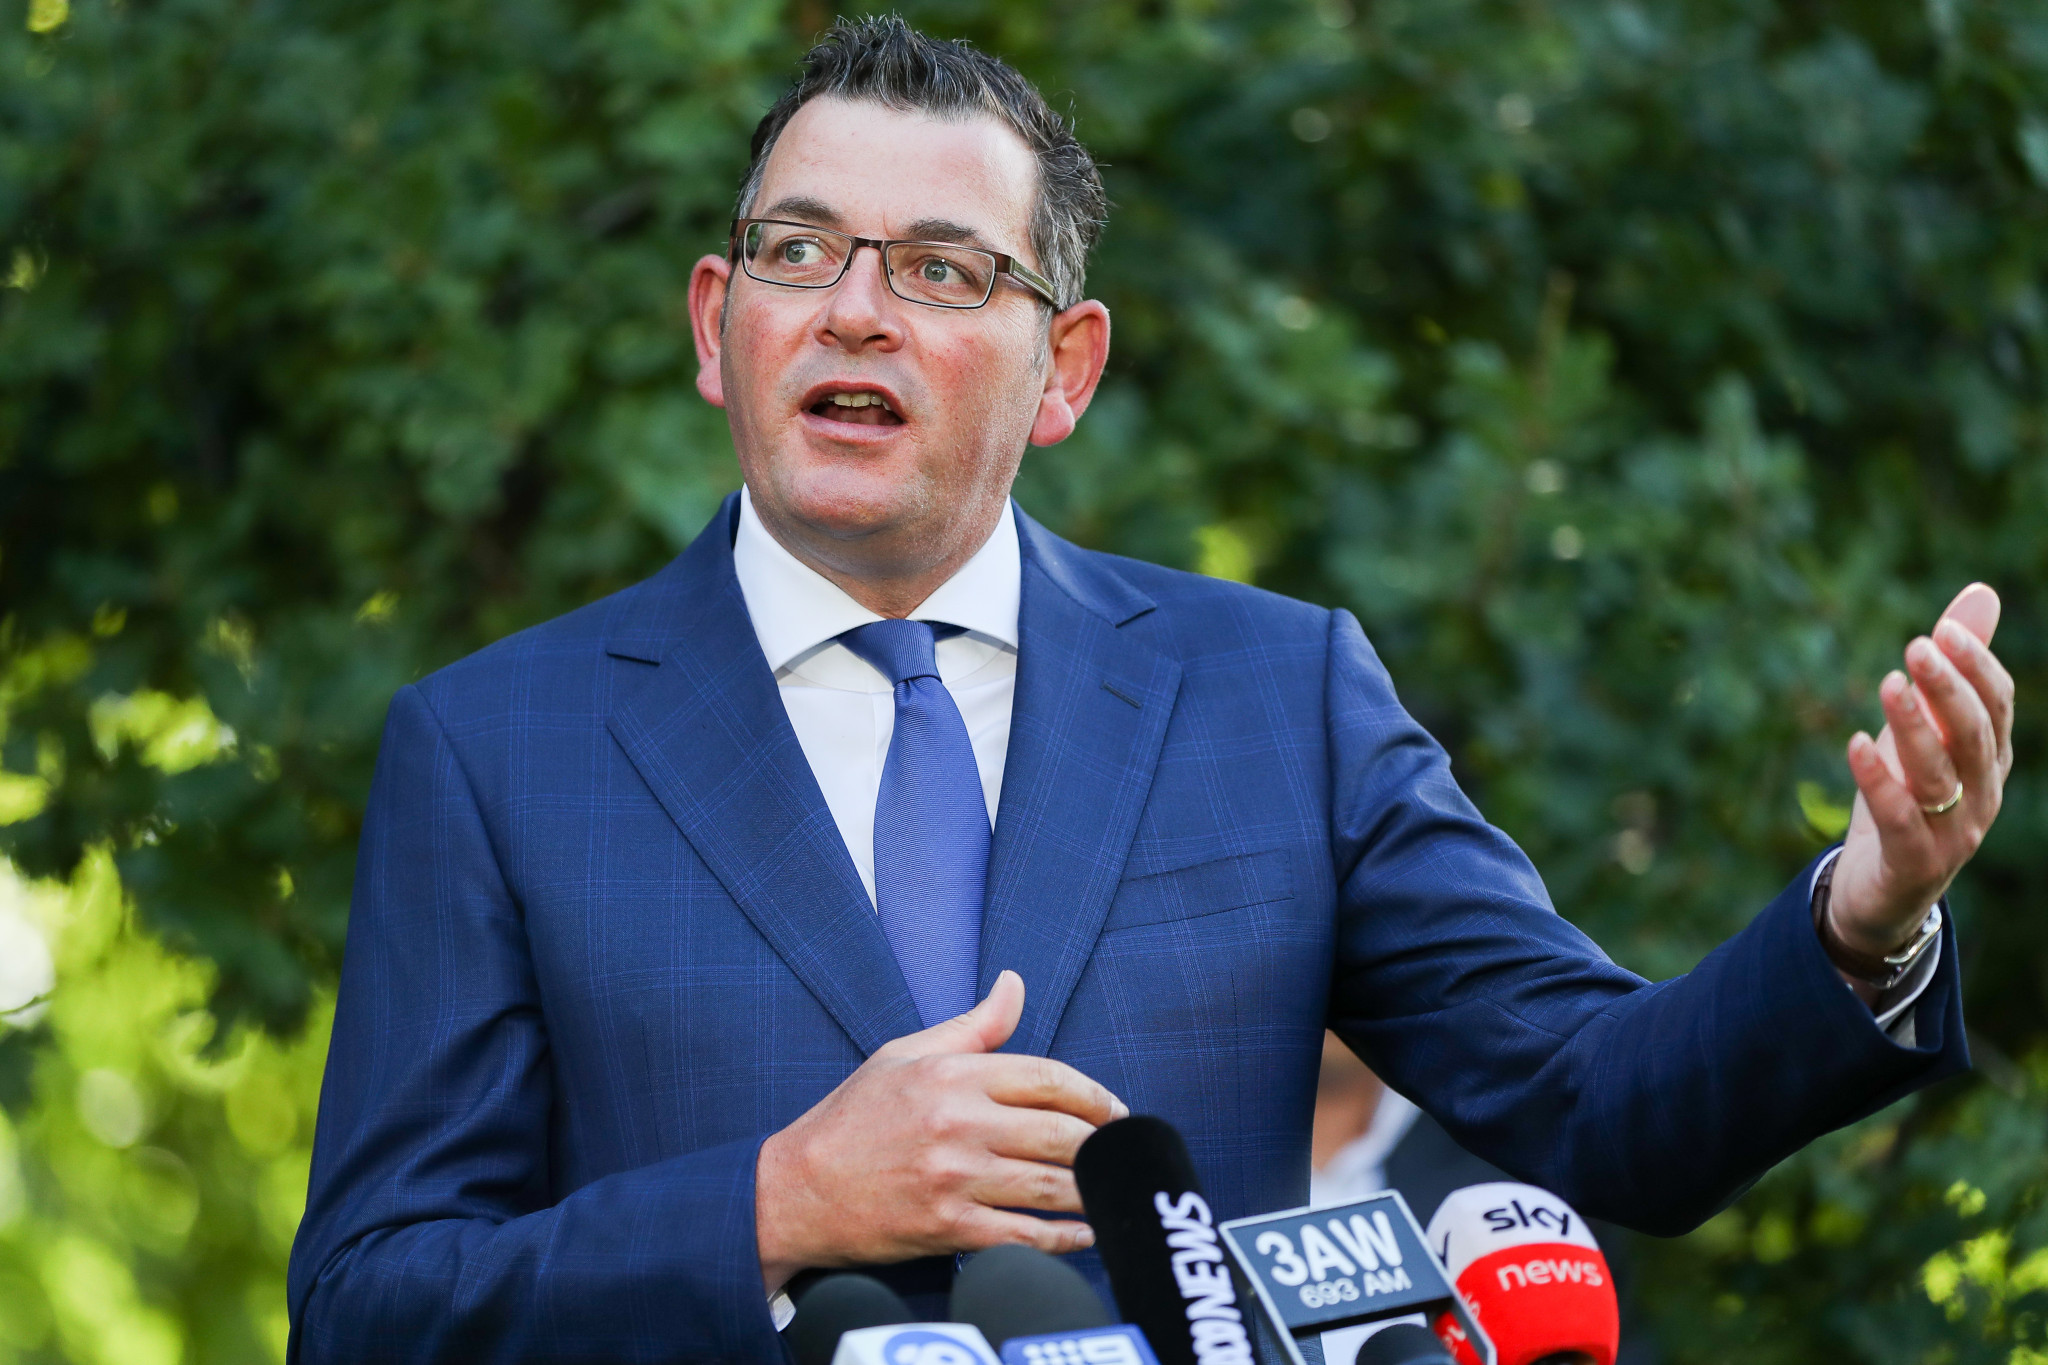 Victoria Premier Daniel Andrews said he would not take money out of schools and hospitals to fund an event which he claimed was 